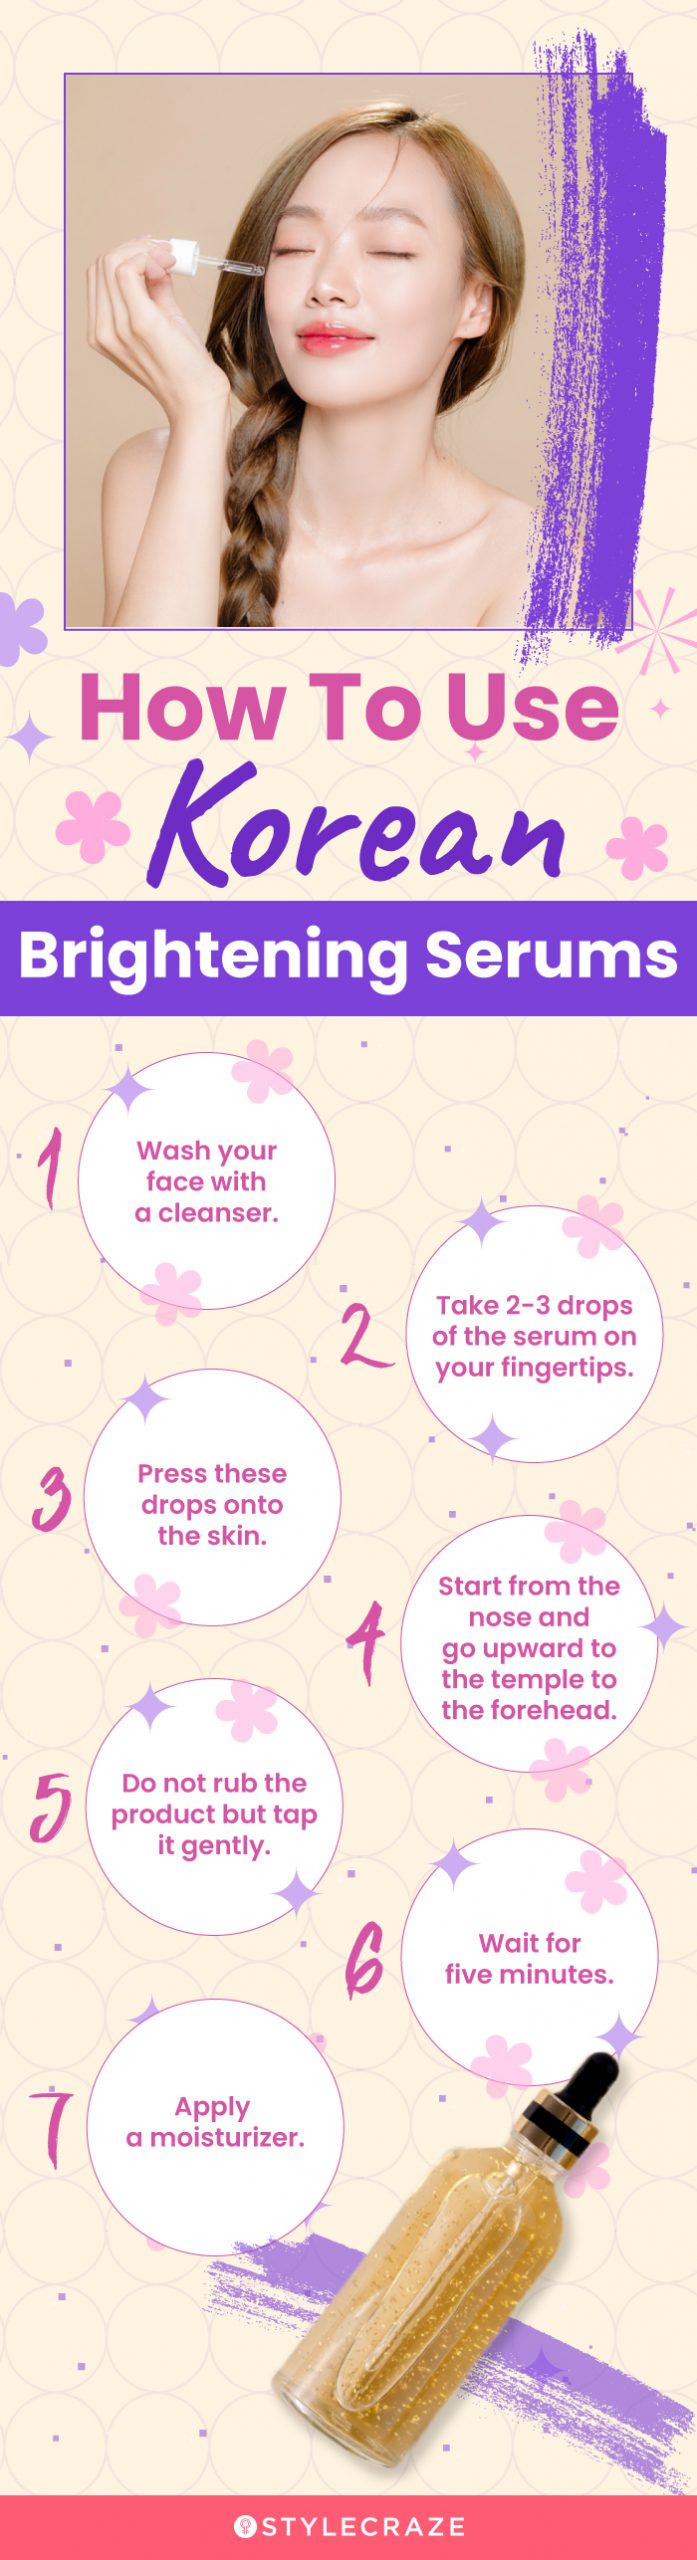 How To Use Korean Brightening Serums (infographic)